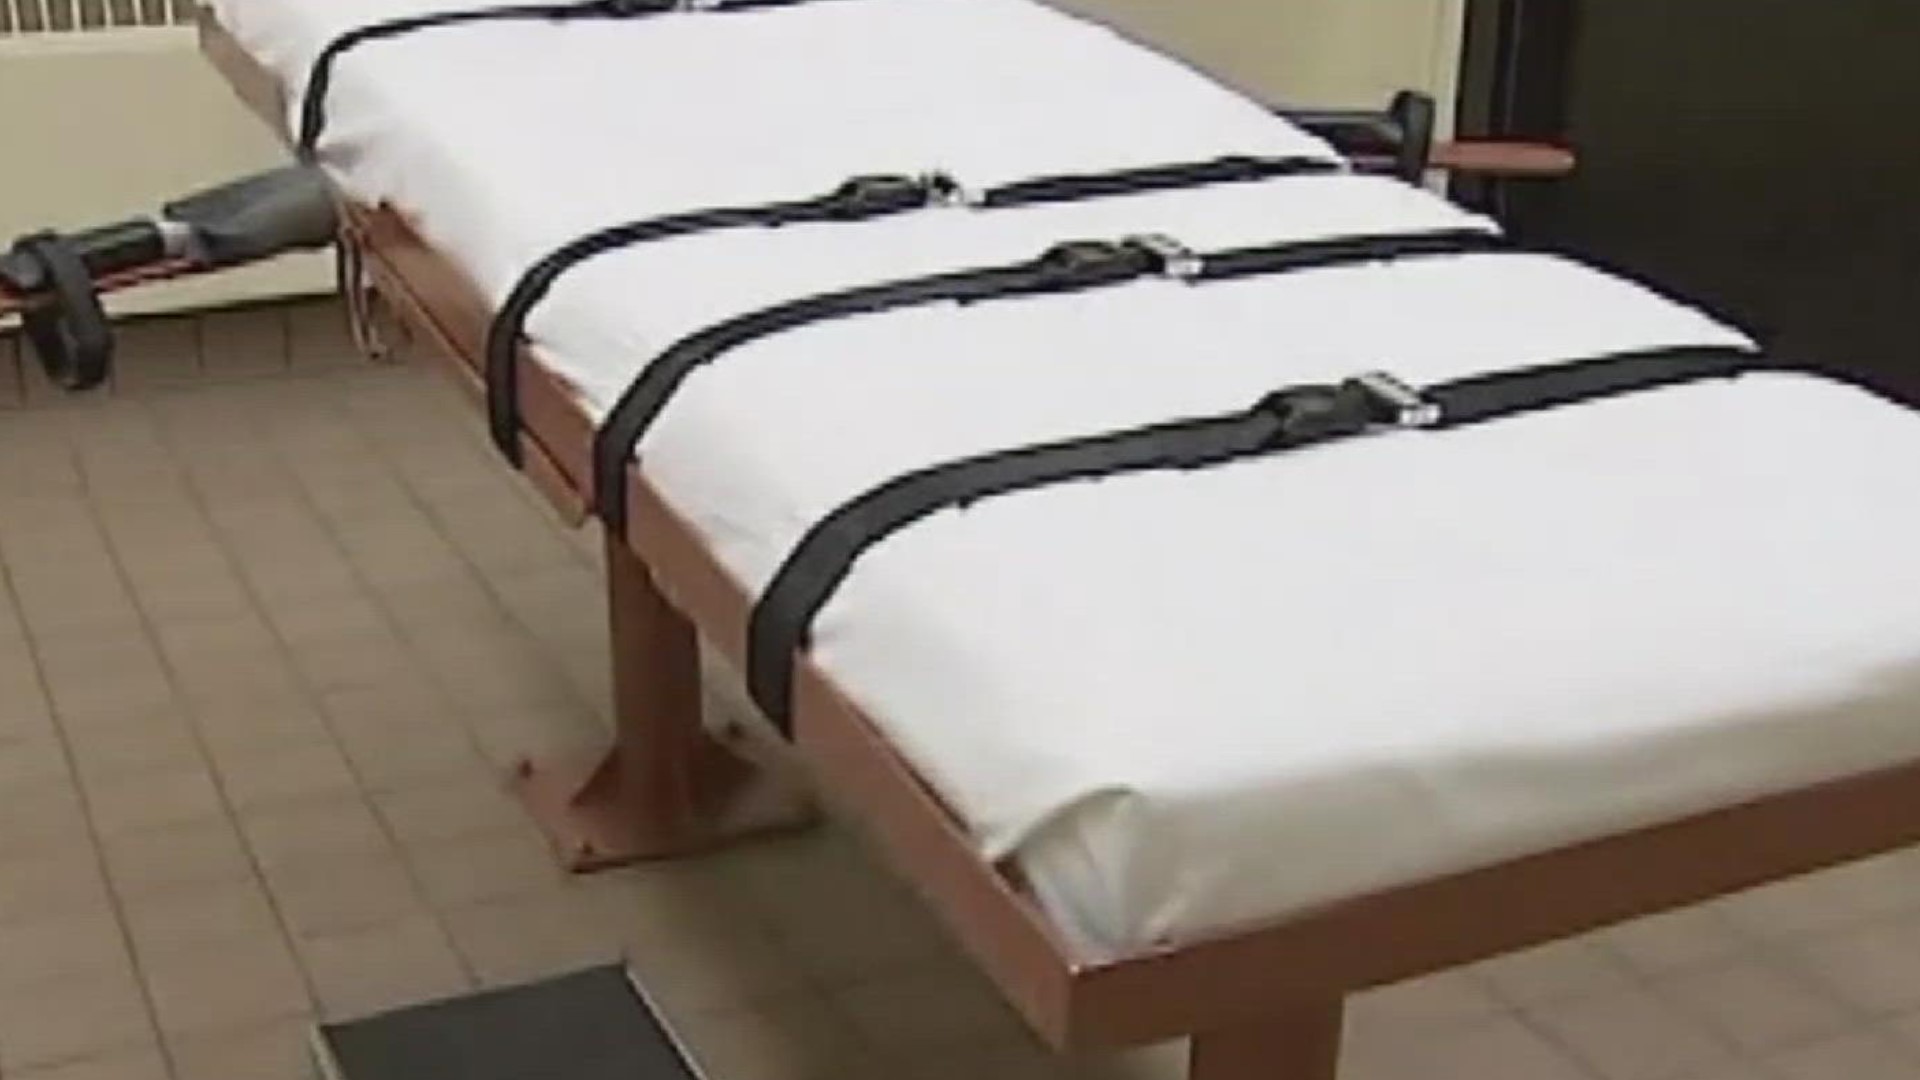 Governor Josh Shapiro announced he will not sign any execution warrants during his term, and is endorsing legislation that would ban the death penalty.